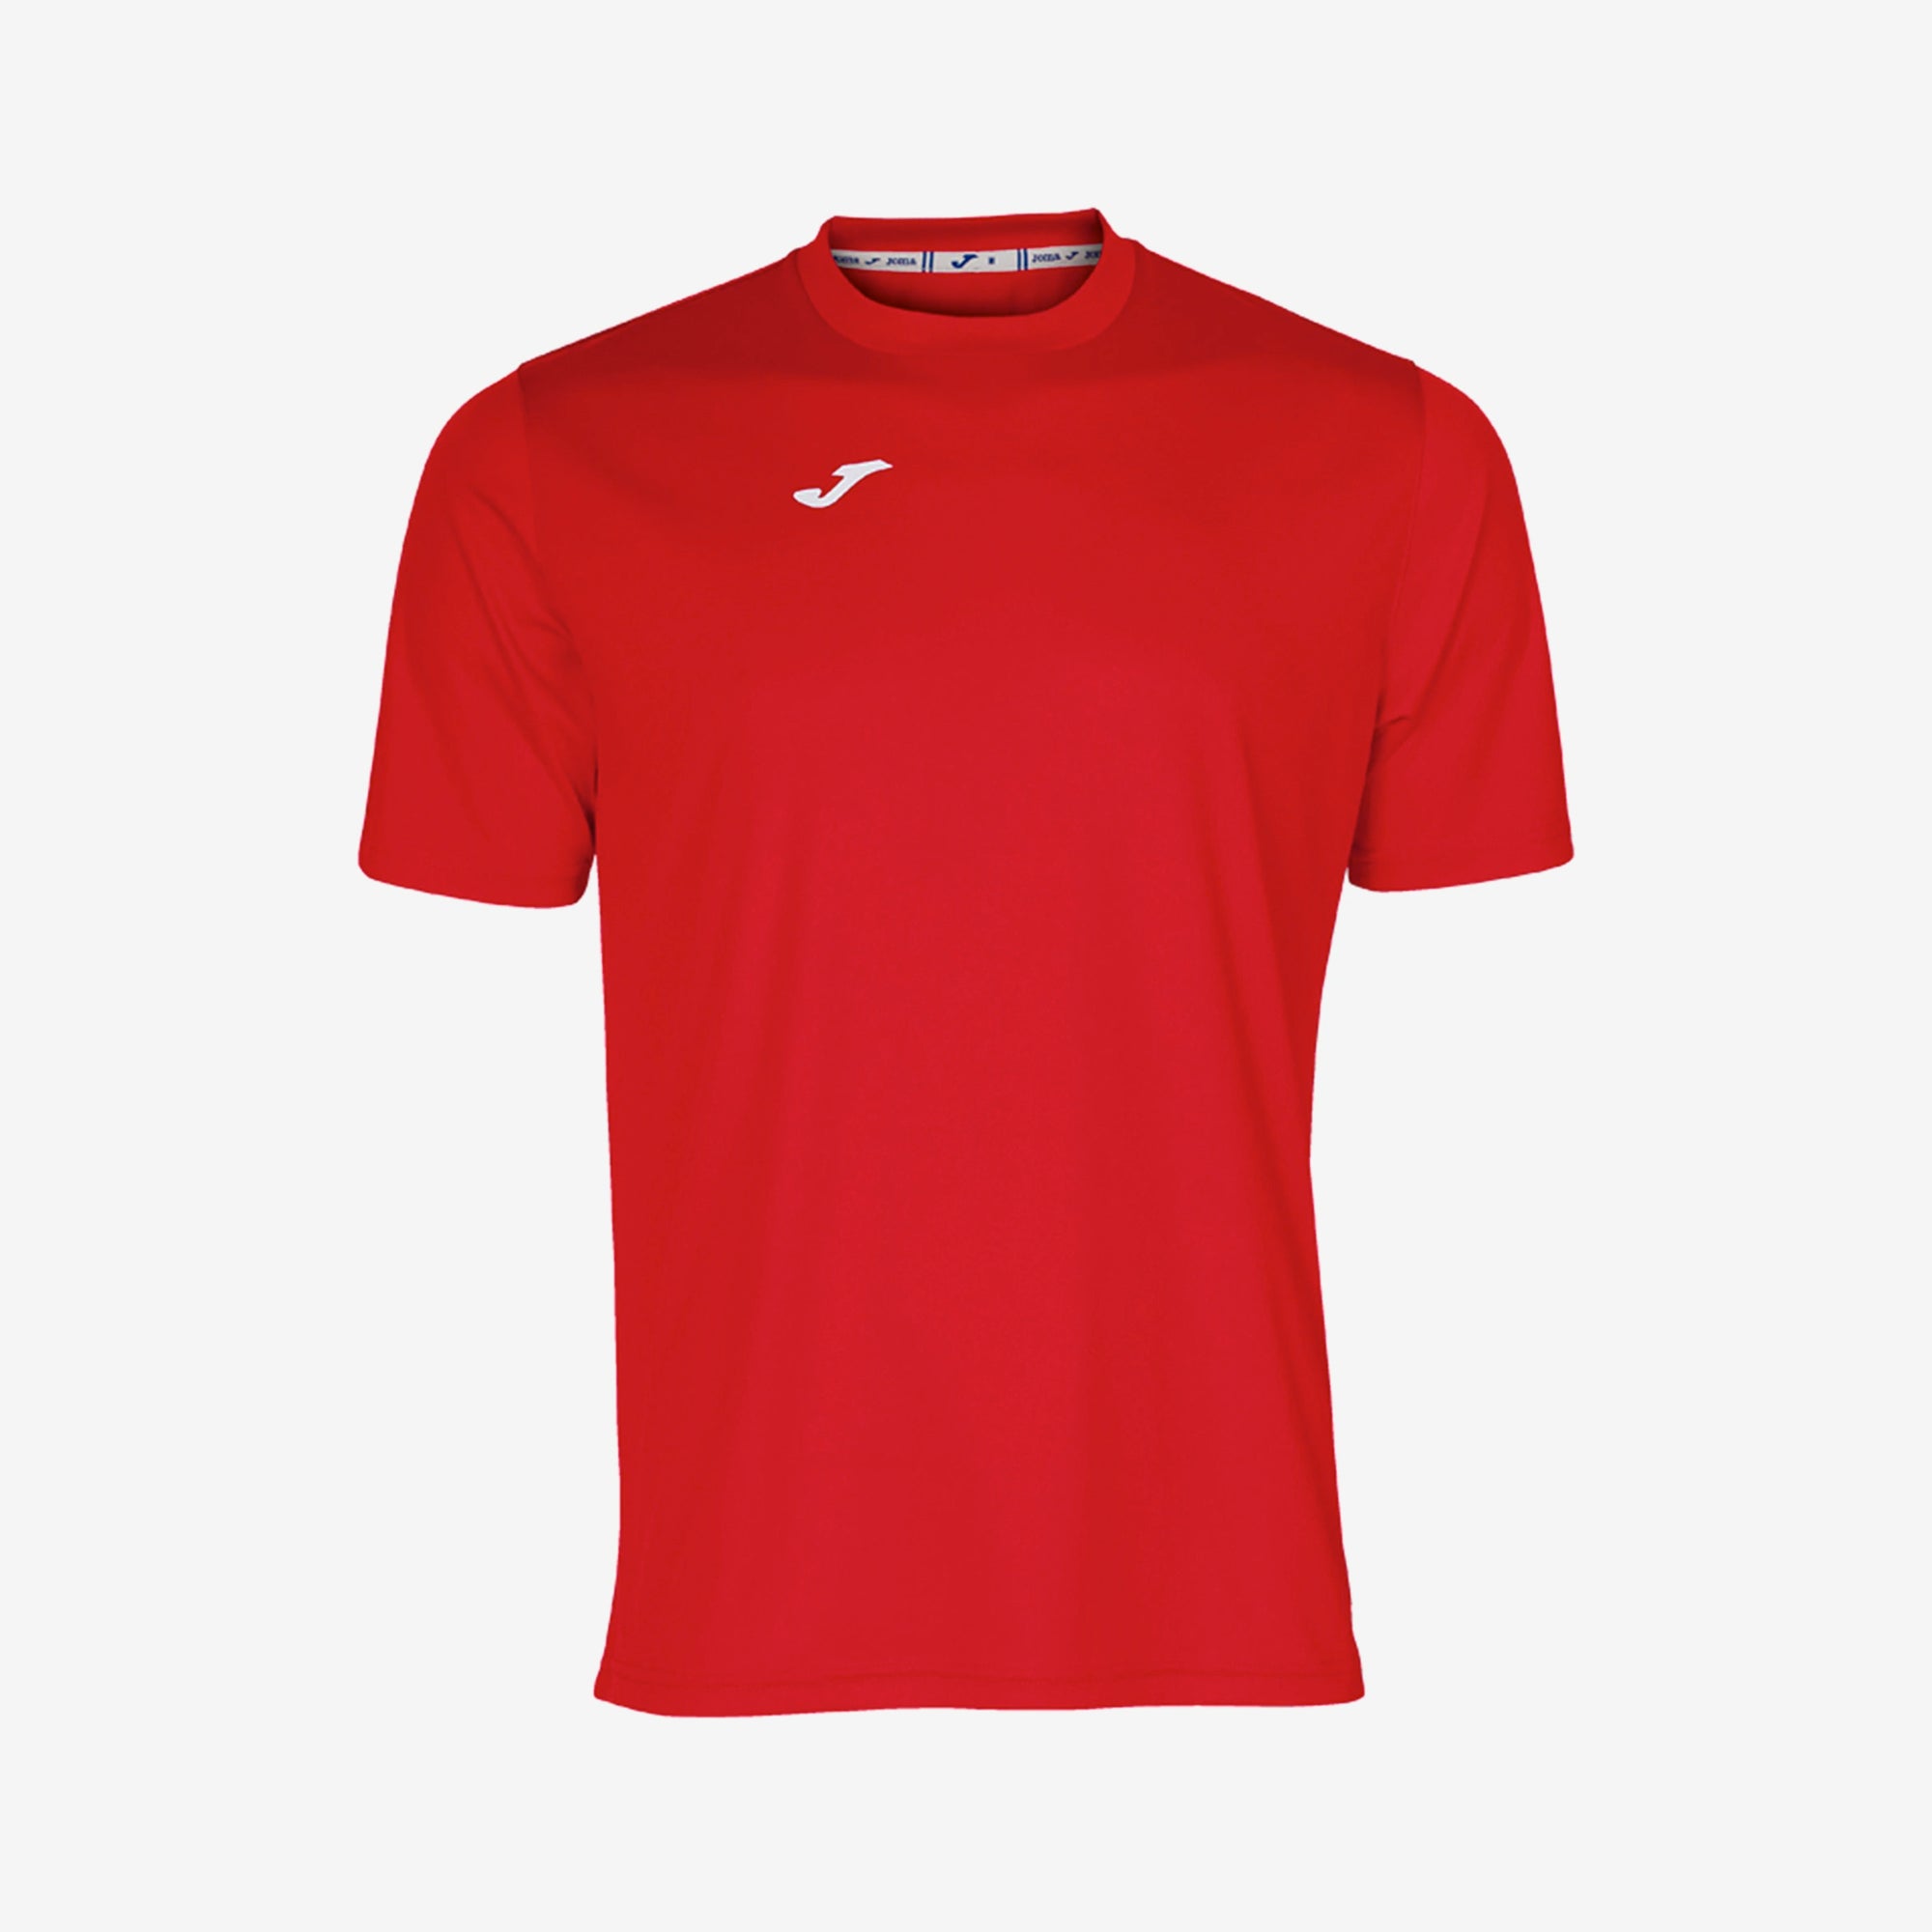 Combi Soccer Jersey - Red